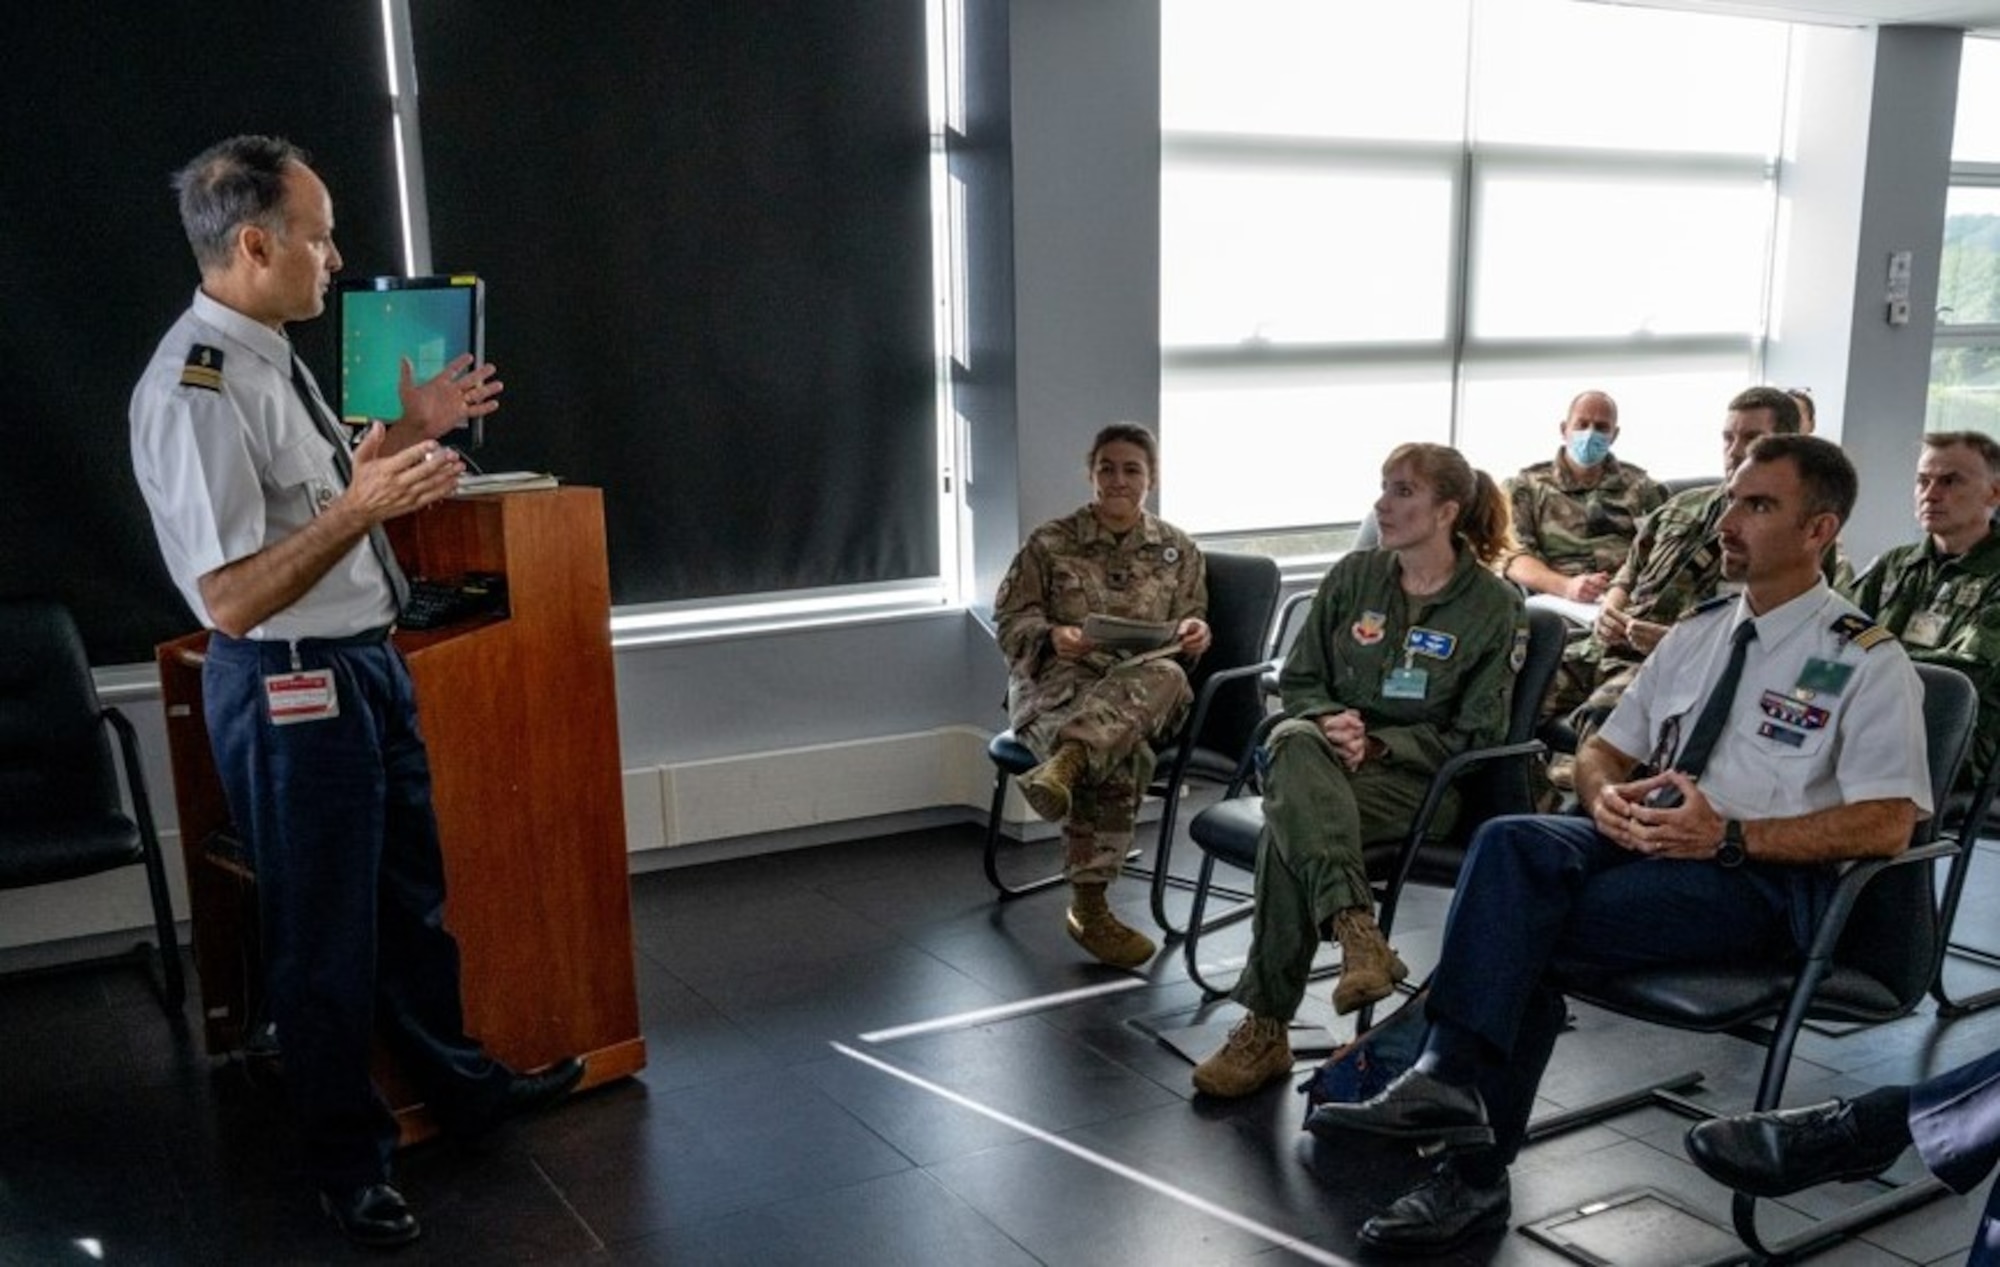 photo of  French air force member standing briefing a group of US and French military personnel sitting in chairs